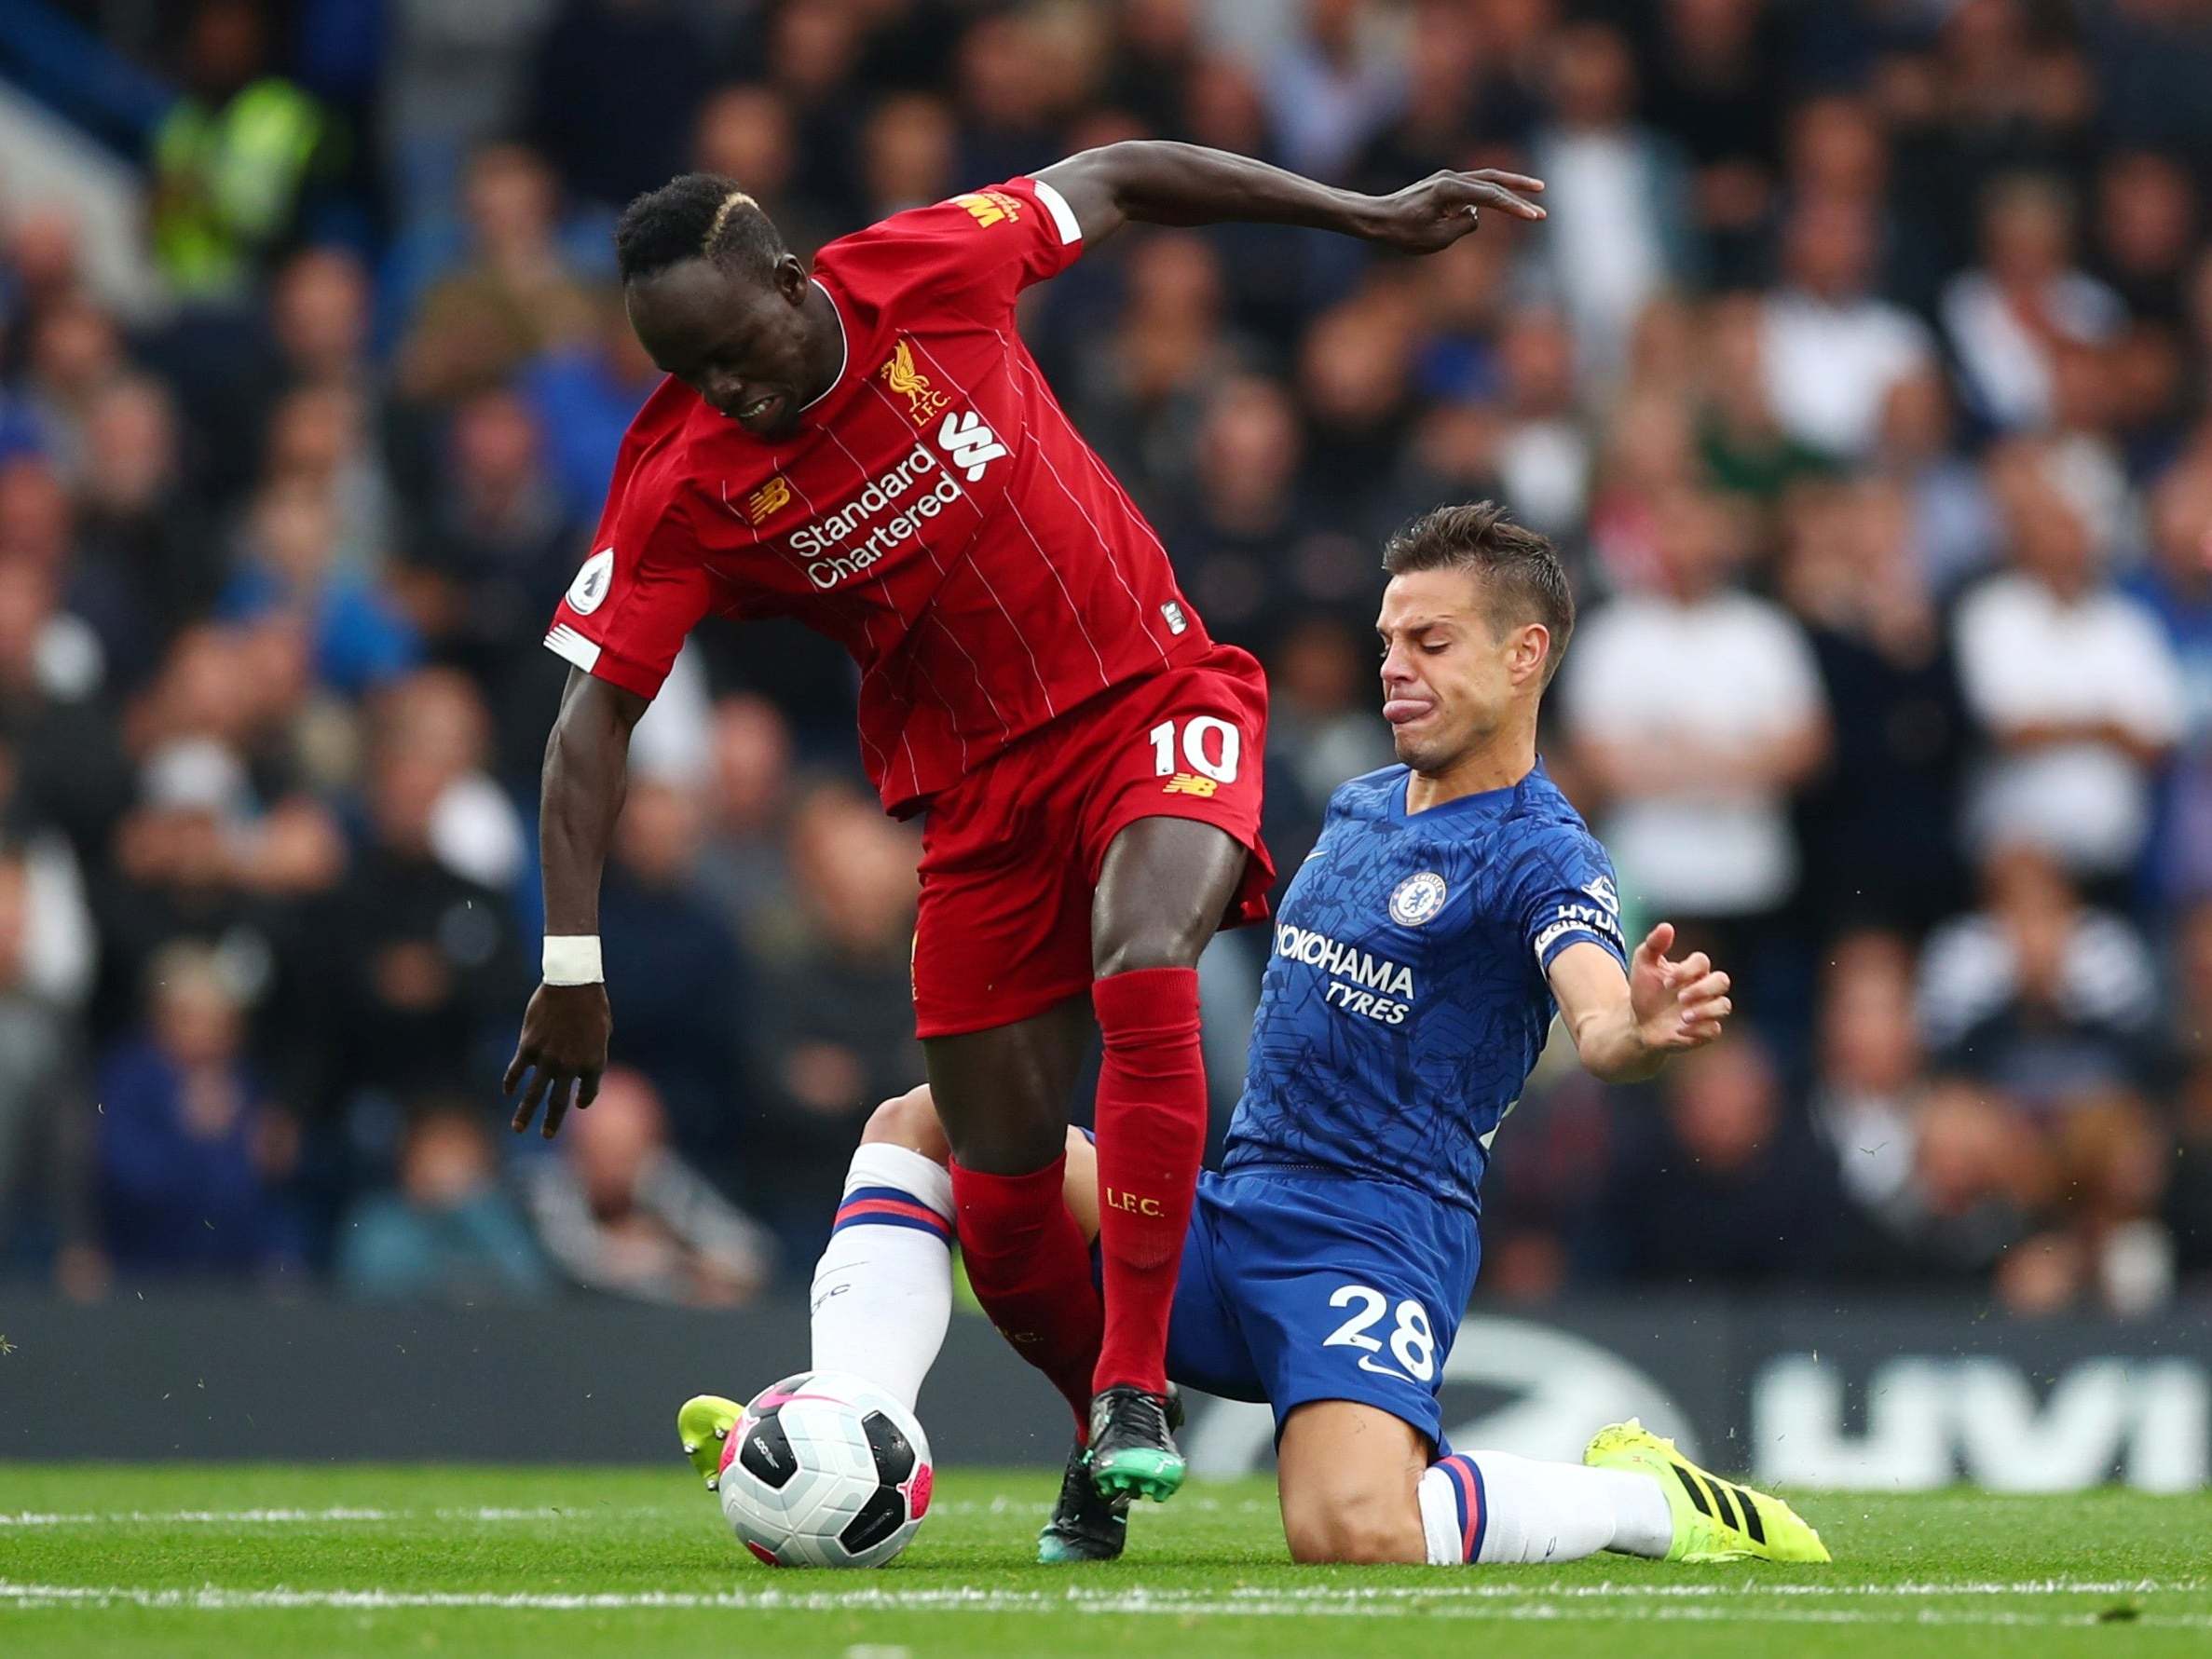 Chelsea vs Liverpool LIVE: Stream, score, goals and latest Premier League updates | The Independent